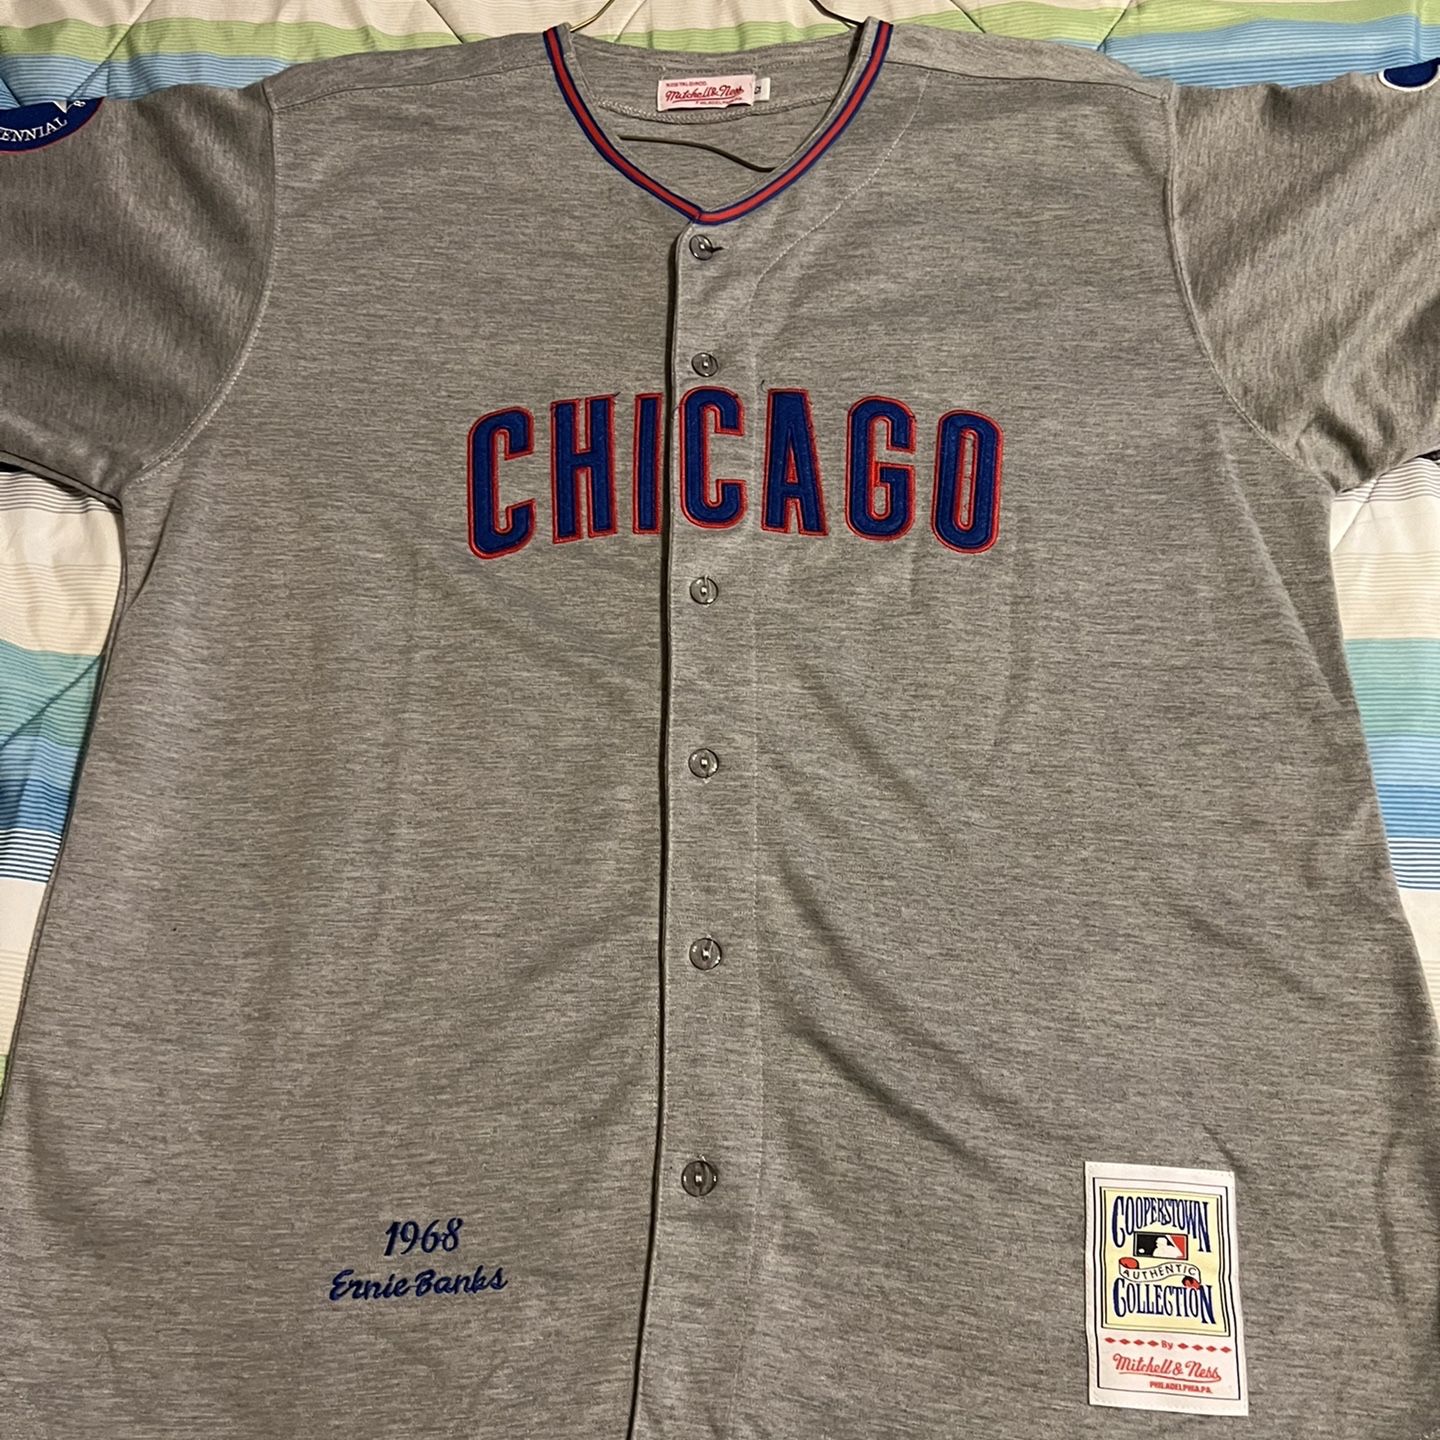 Vintage Mitchell & Ness MLB Chicago Cubs Ernie Banks Baseball Jersey